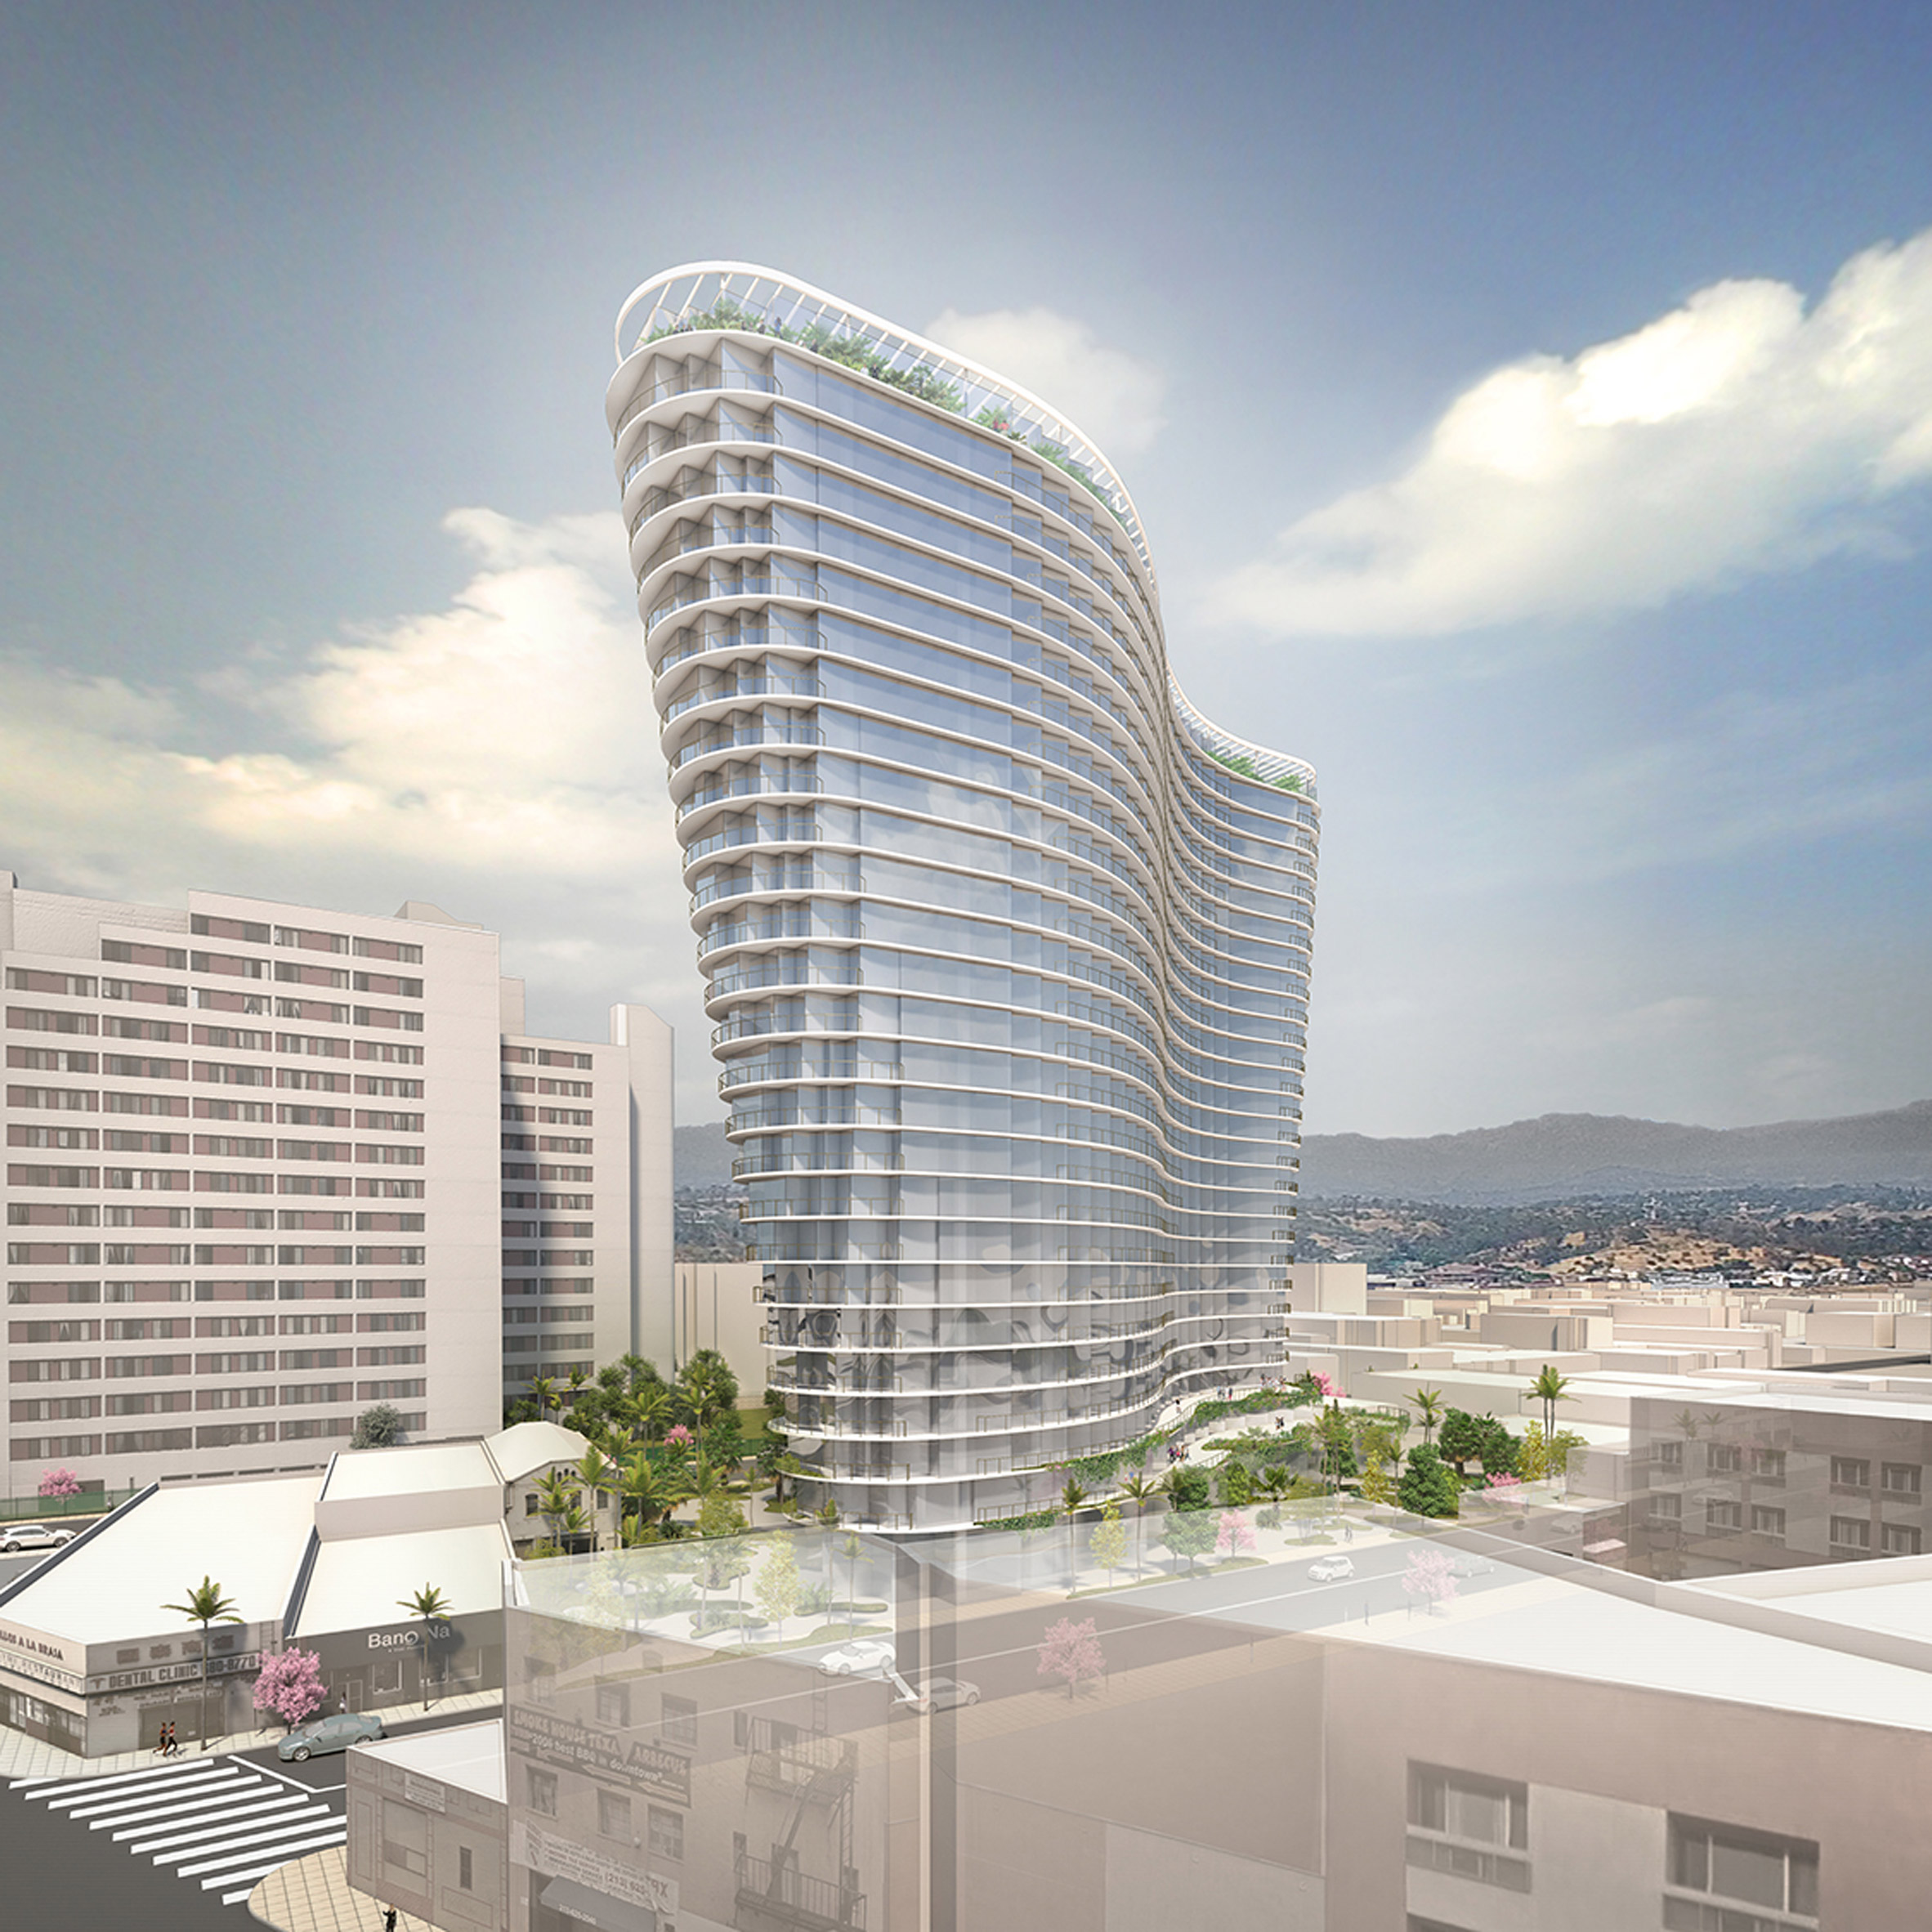 Studio Gang designs curvaceous tower for LA's Chinatown